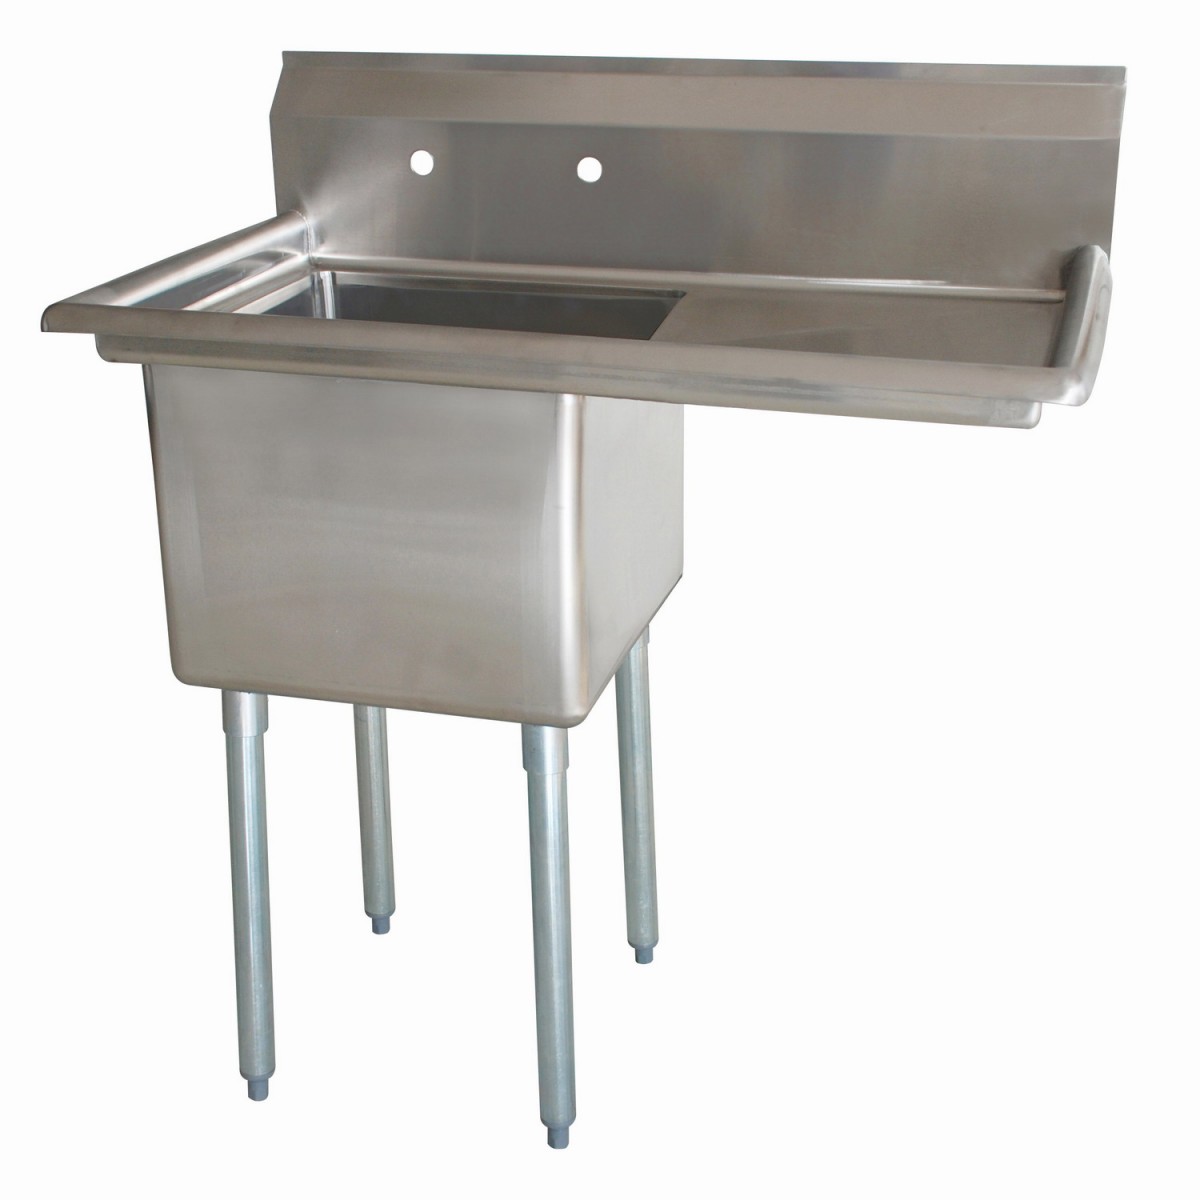 Sink One Compartment Right Drainboard Prep Sinks Food